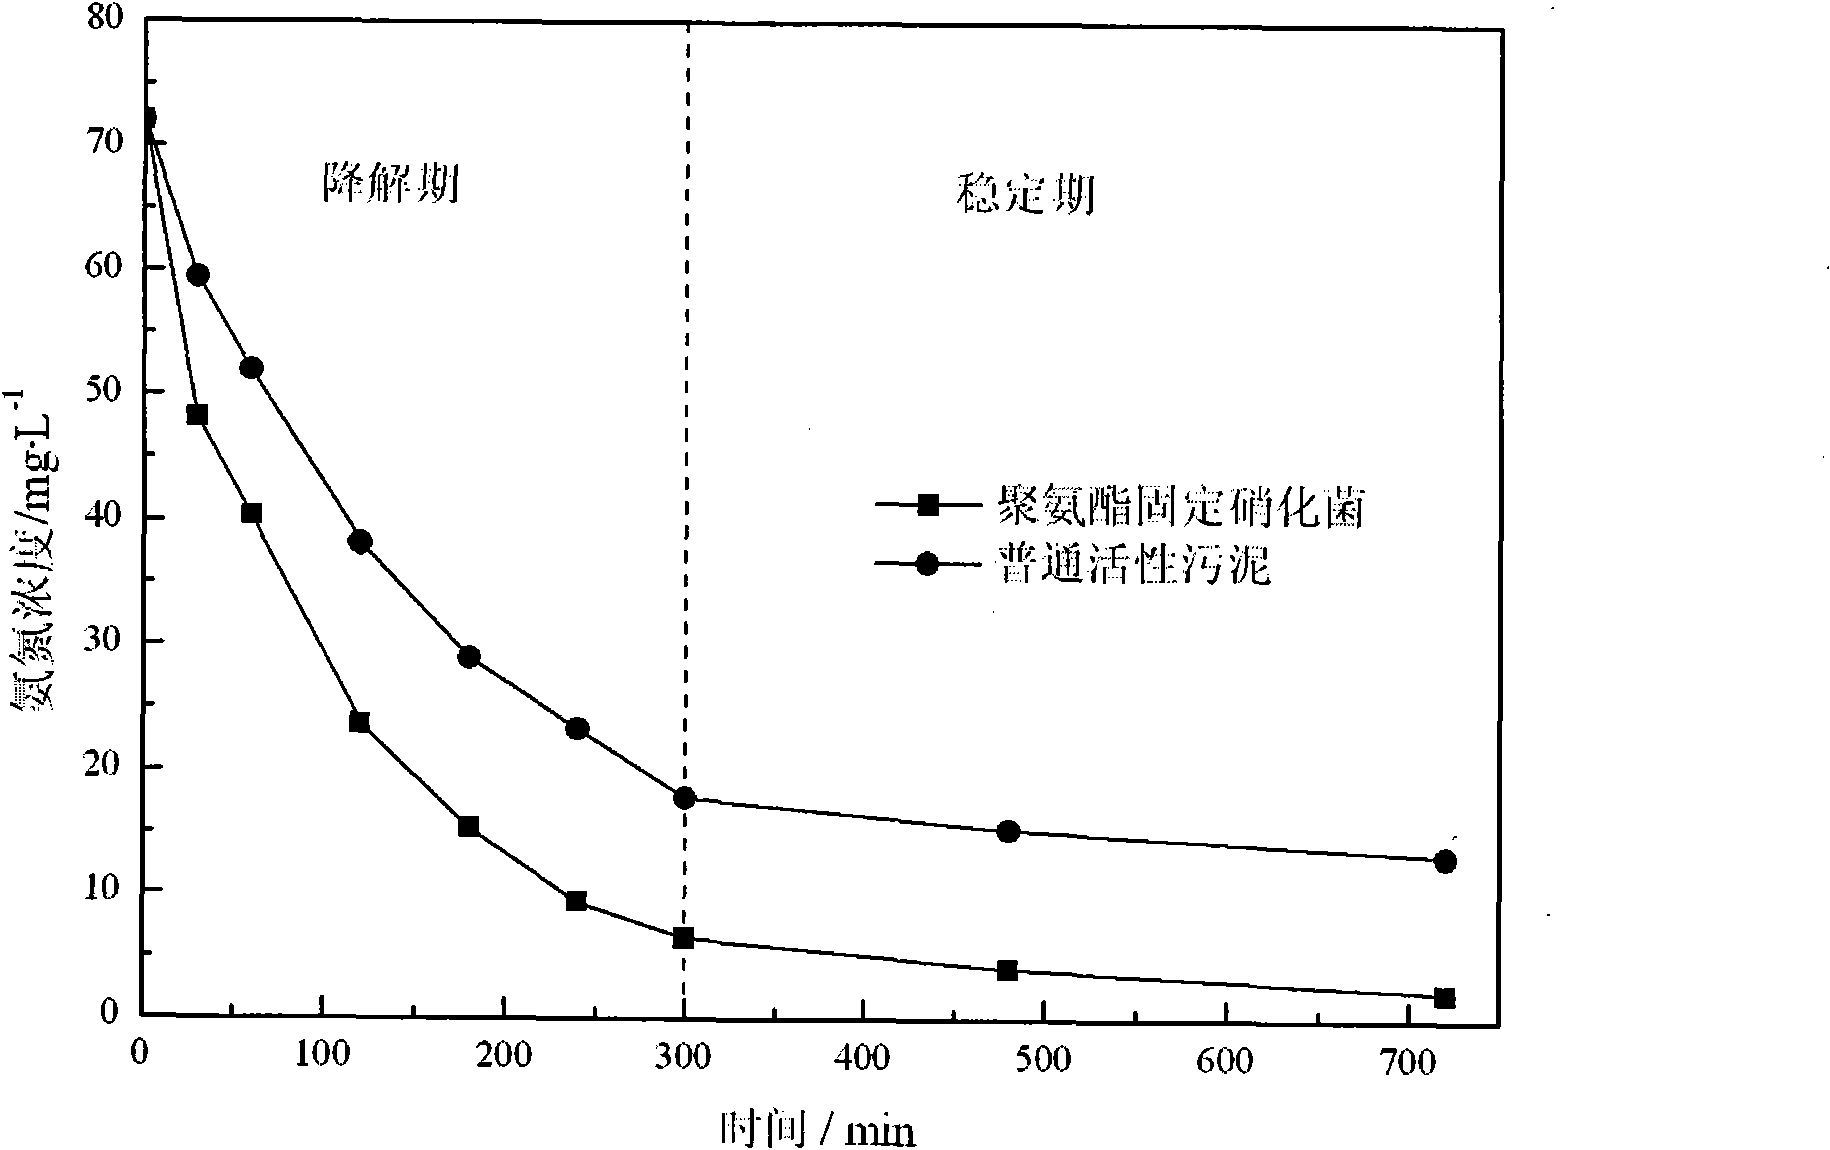 Method for treating nitrogen-containing wastewater from power plants by nitrifying bacteria immobilized on polyurethane